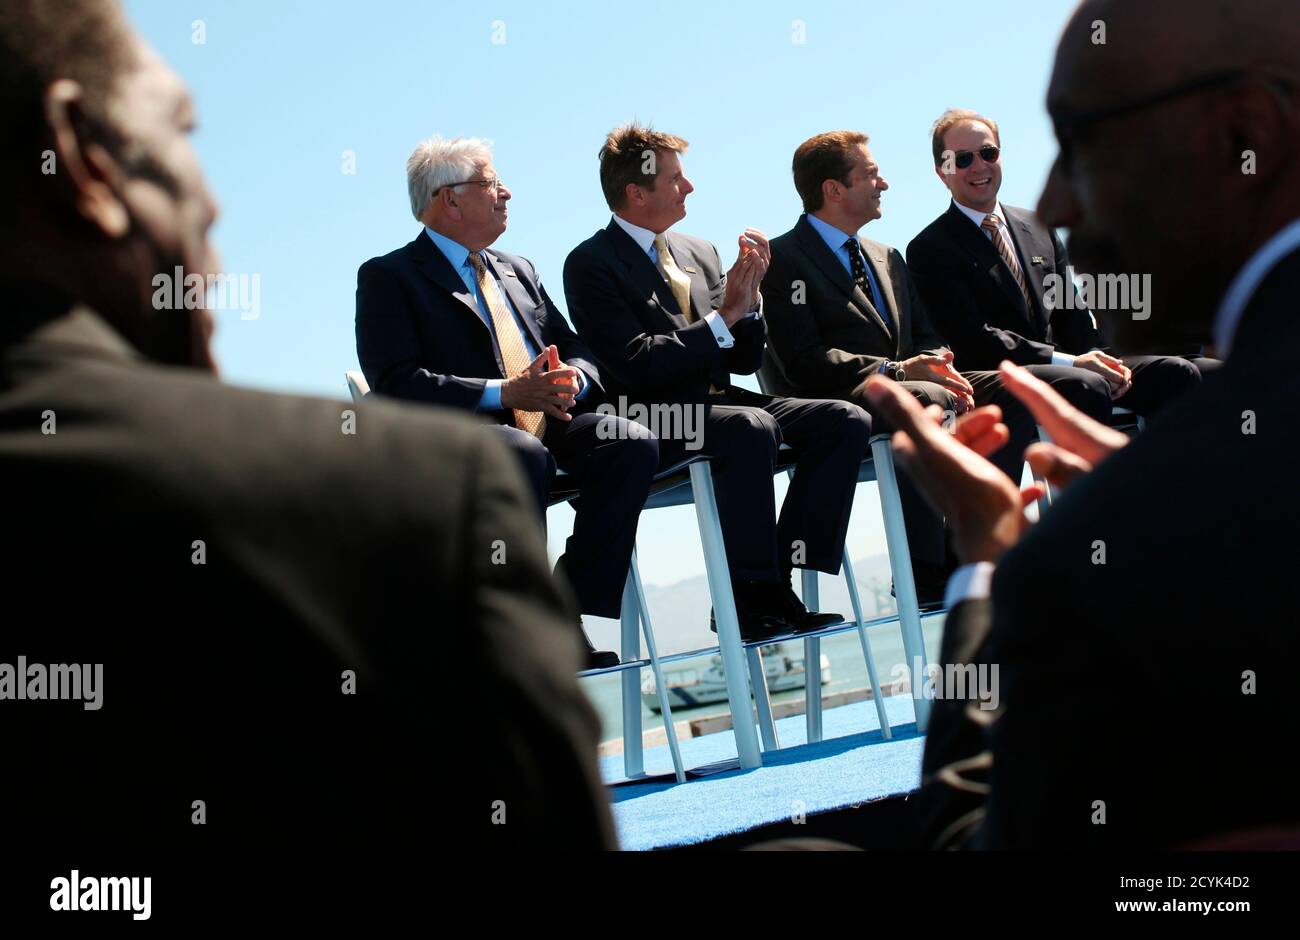 Former Golden State Warriors players Al Attles (L) and Nate Thurmond  applaud as they frame NBA Commissioner David Stern (2nd L) and Warriors  executives during an announcement of the team's plans to